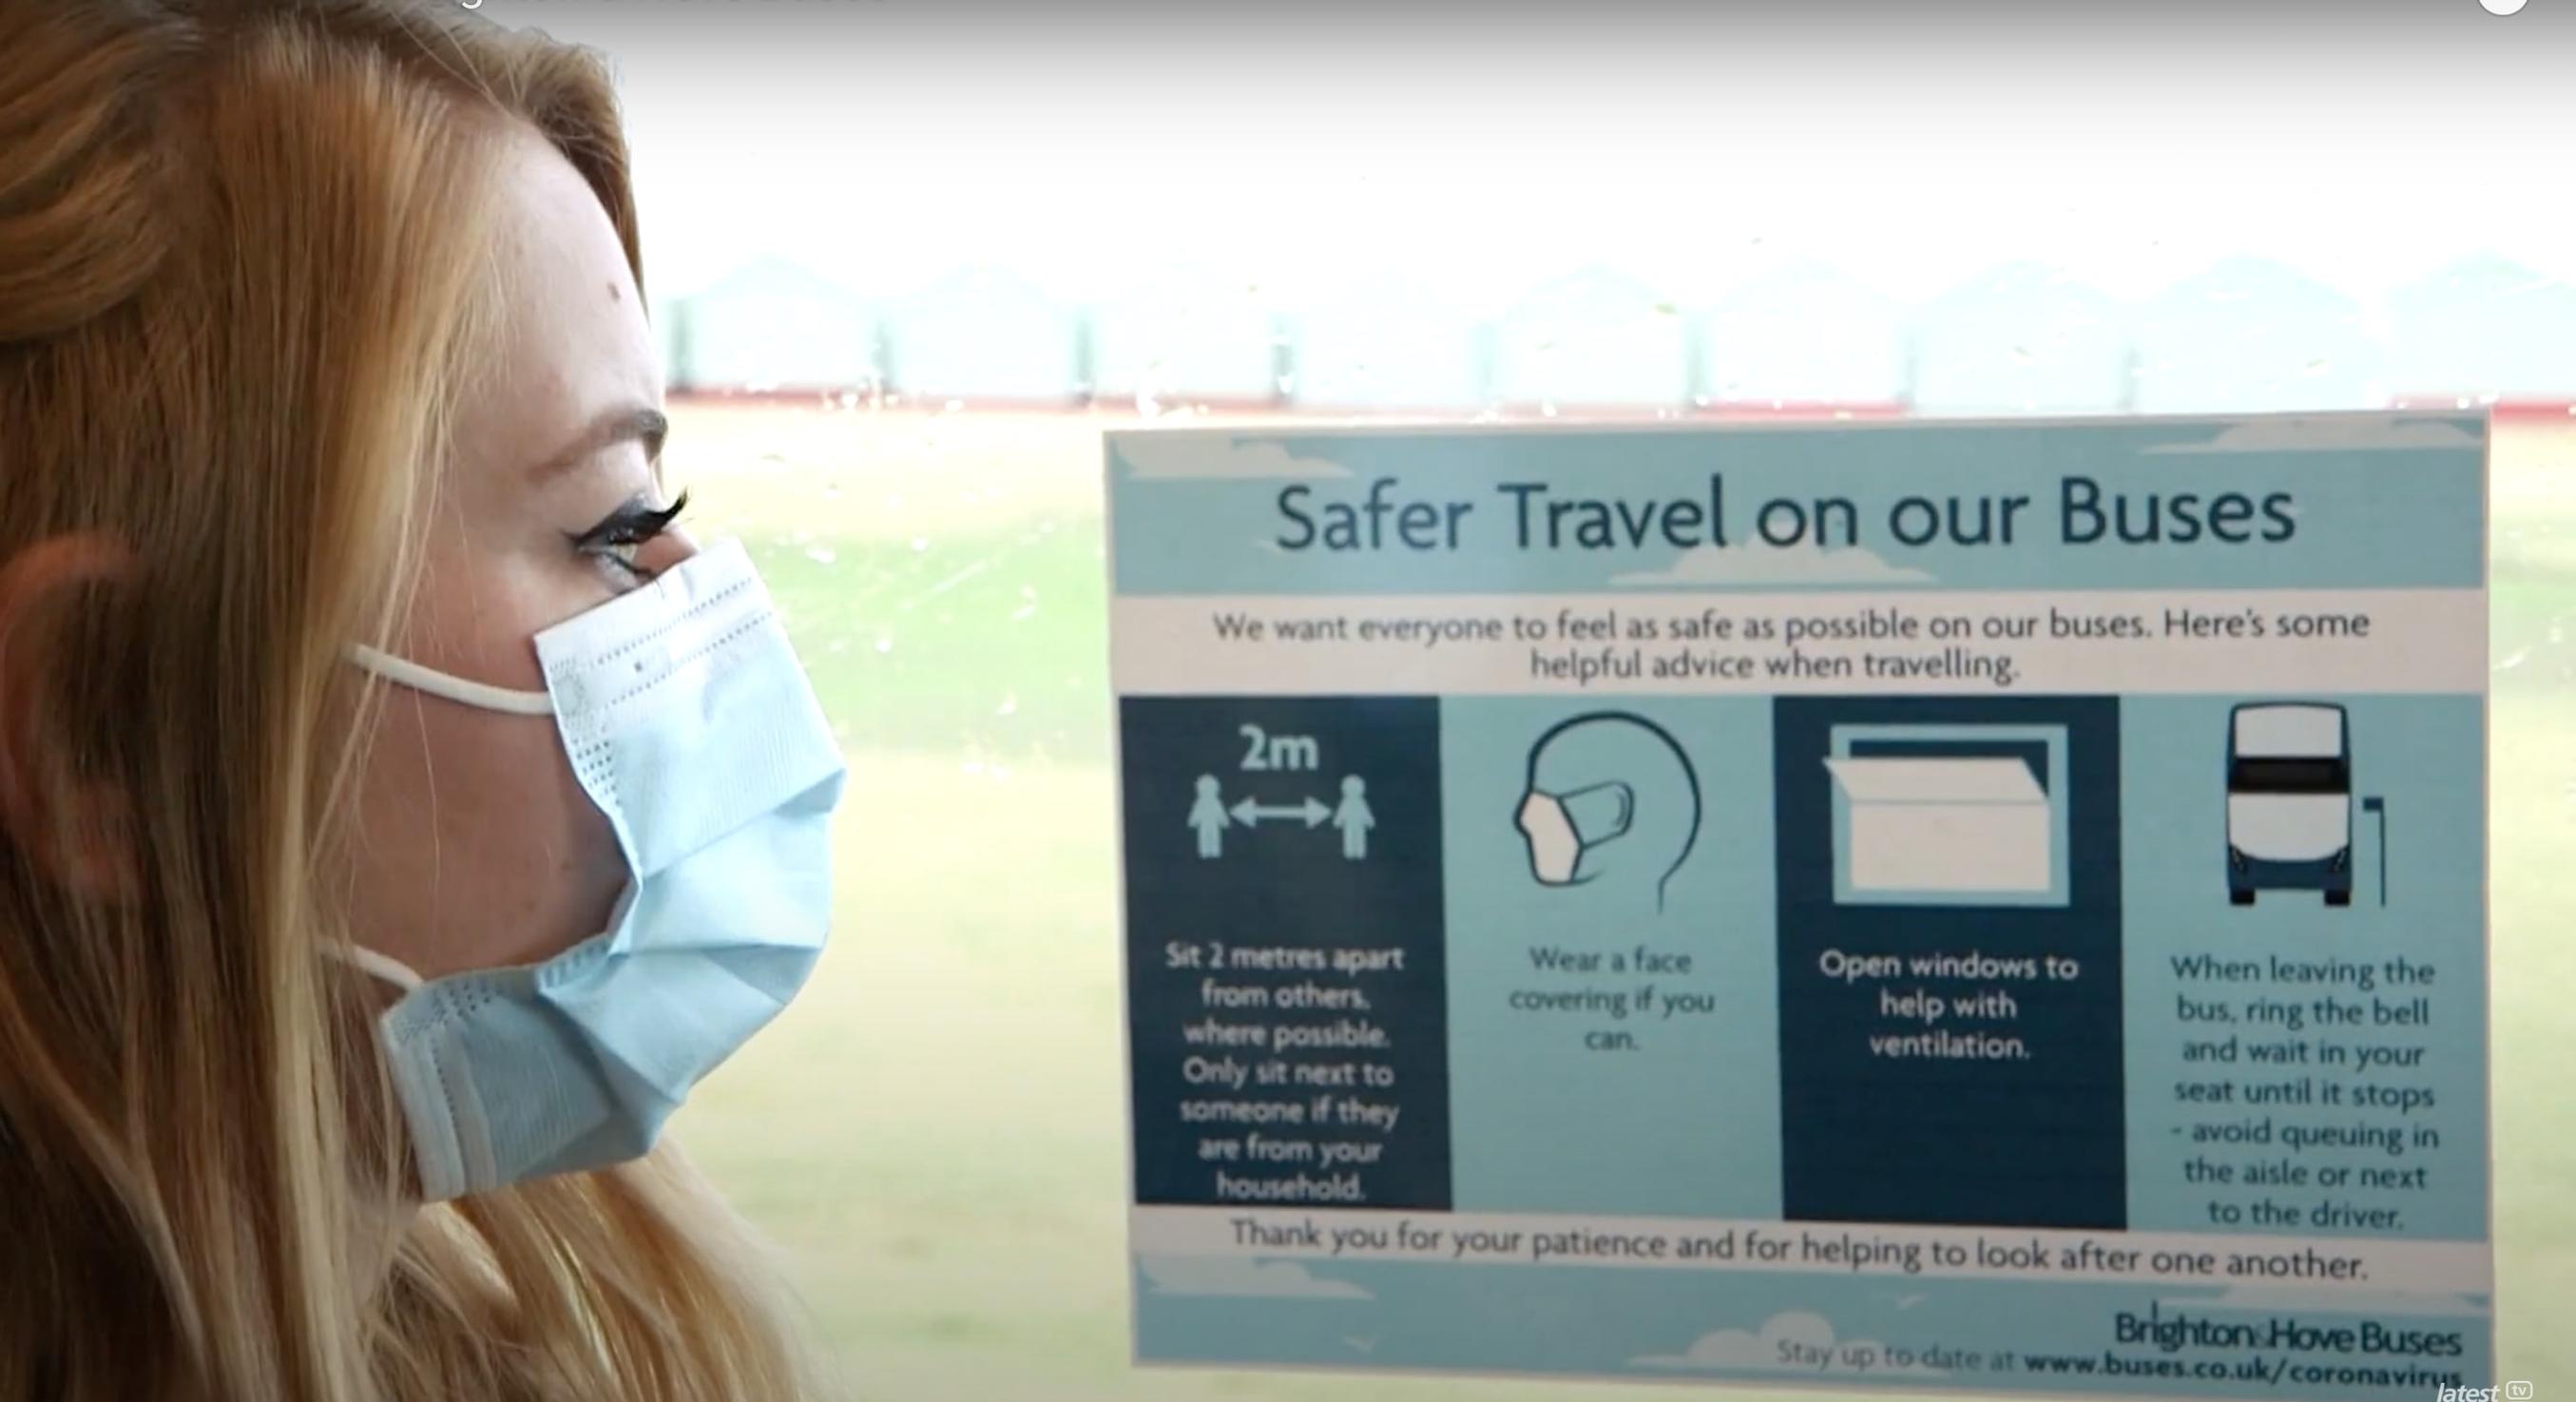 Bus users are now required to wear face coverings